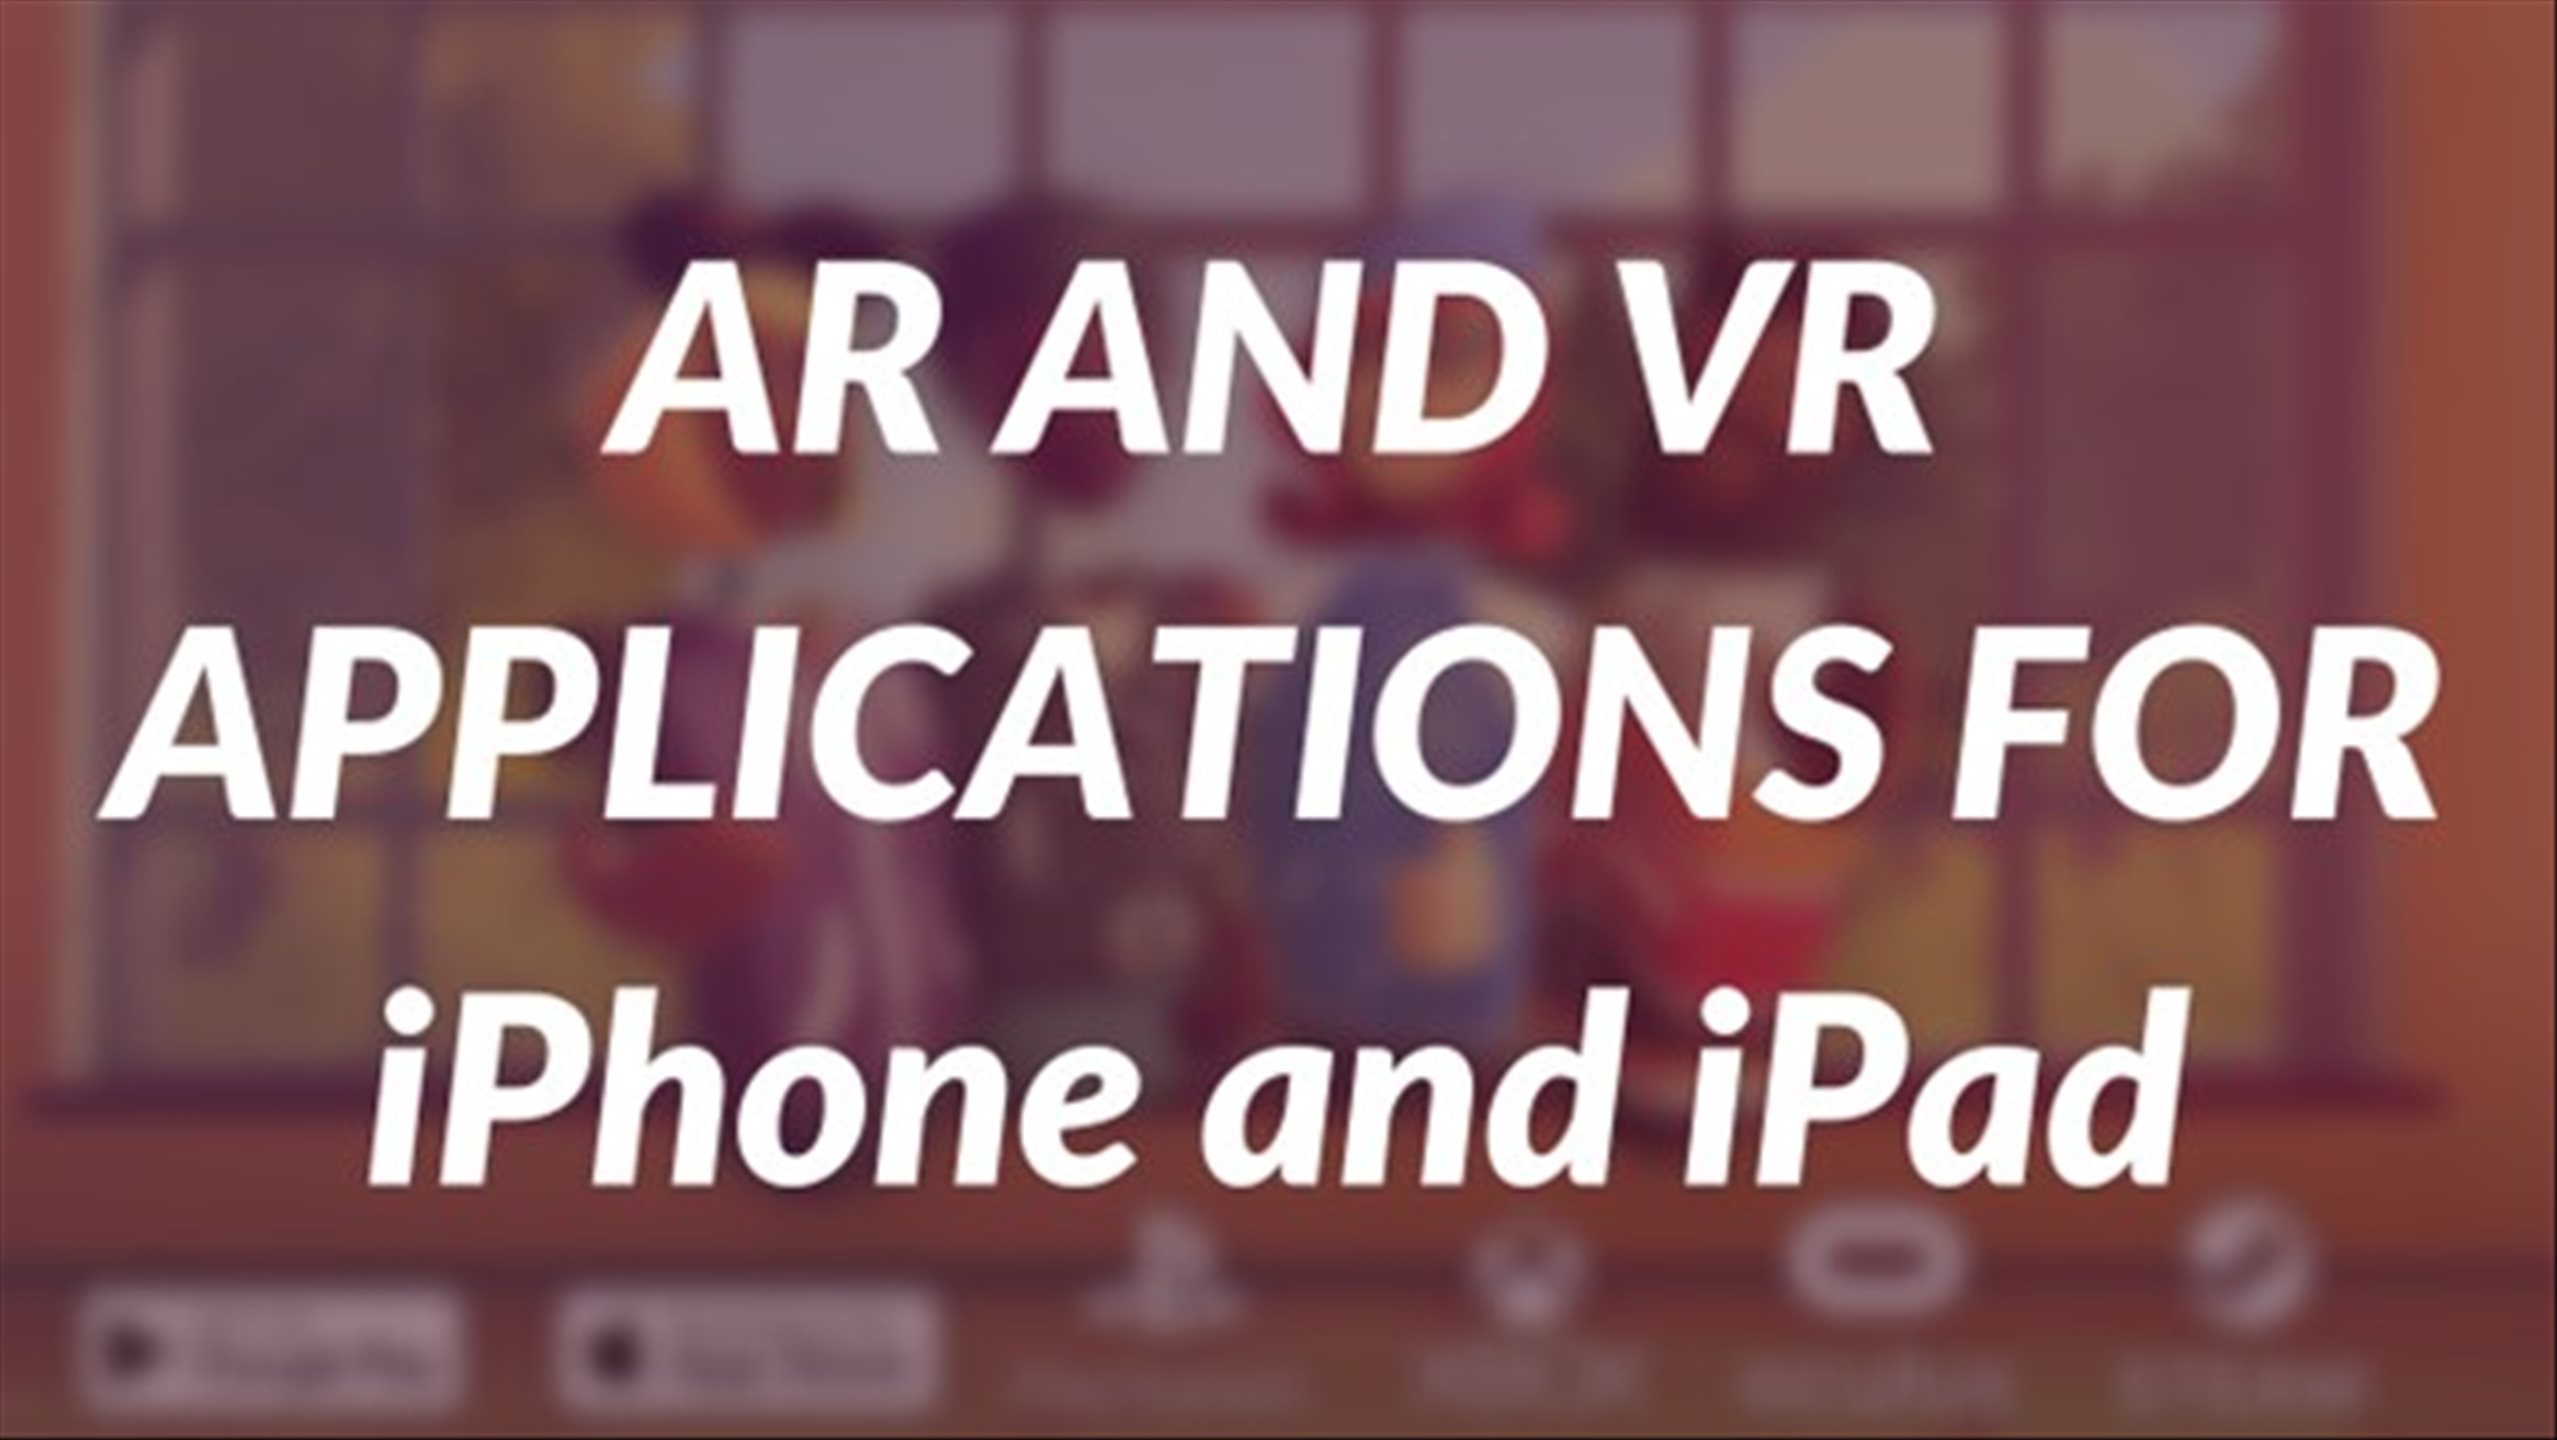 AR-and-VR-for-iPhone-and-iPad